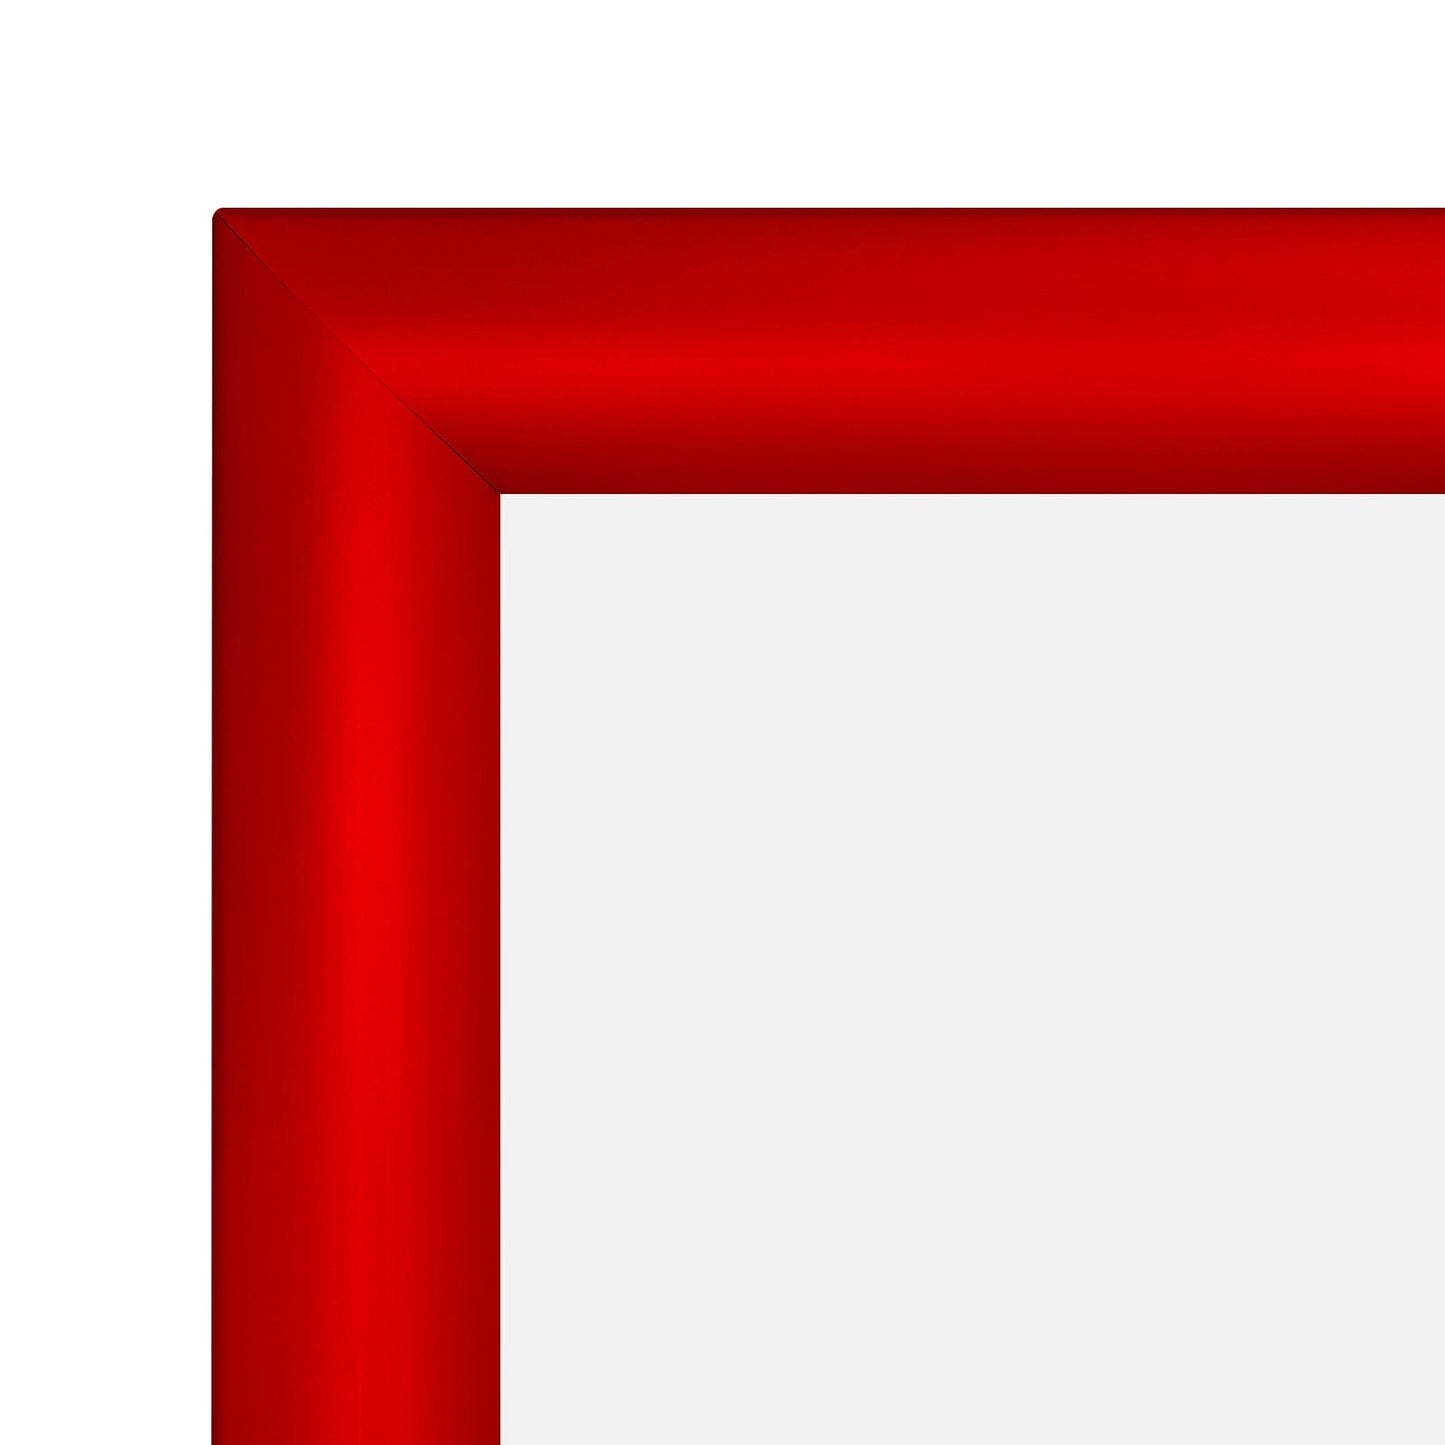 12x24  TRADEframe Red Snap Frame 12x24 - 1.2 inch profile - Snap Frames Direct